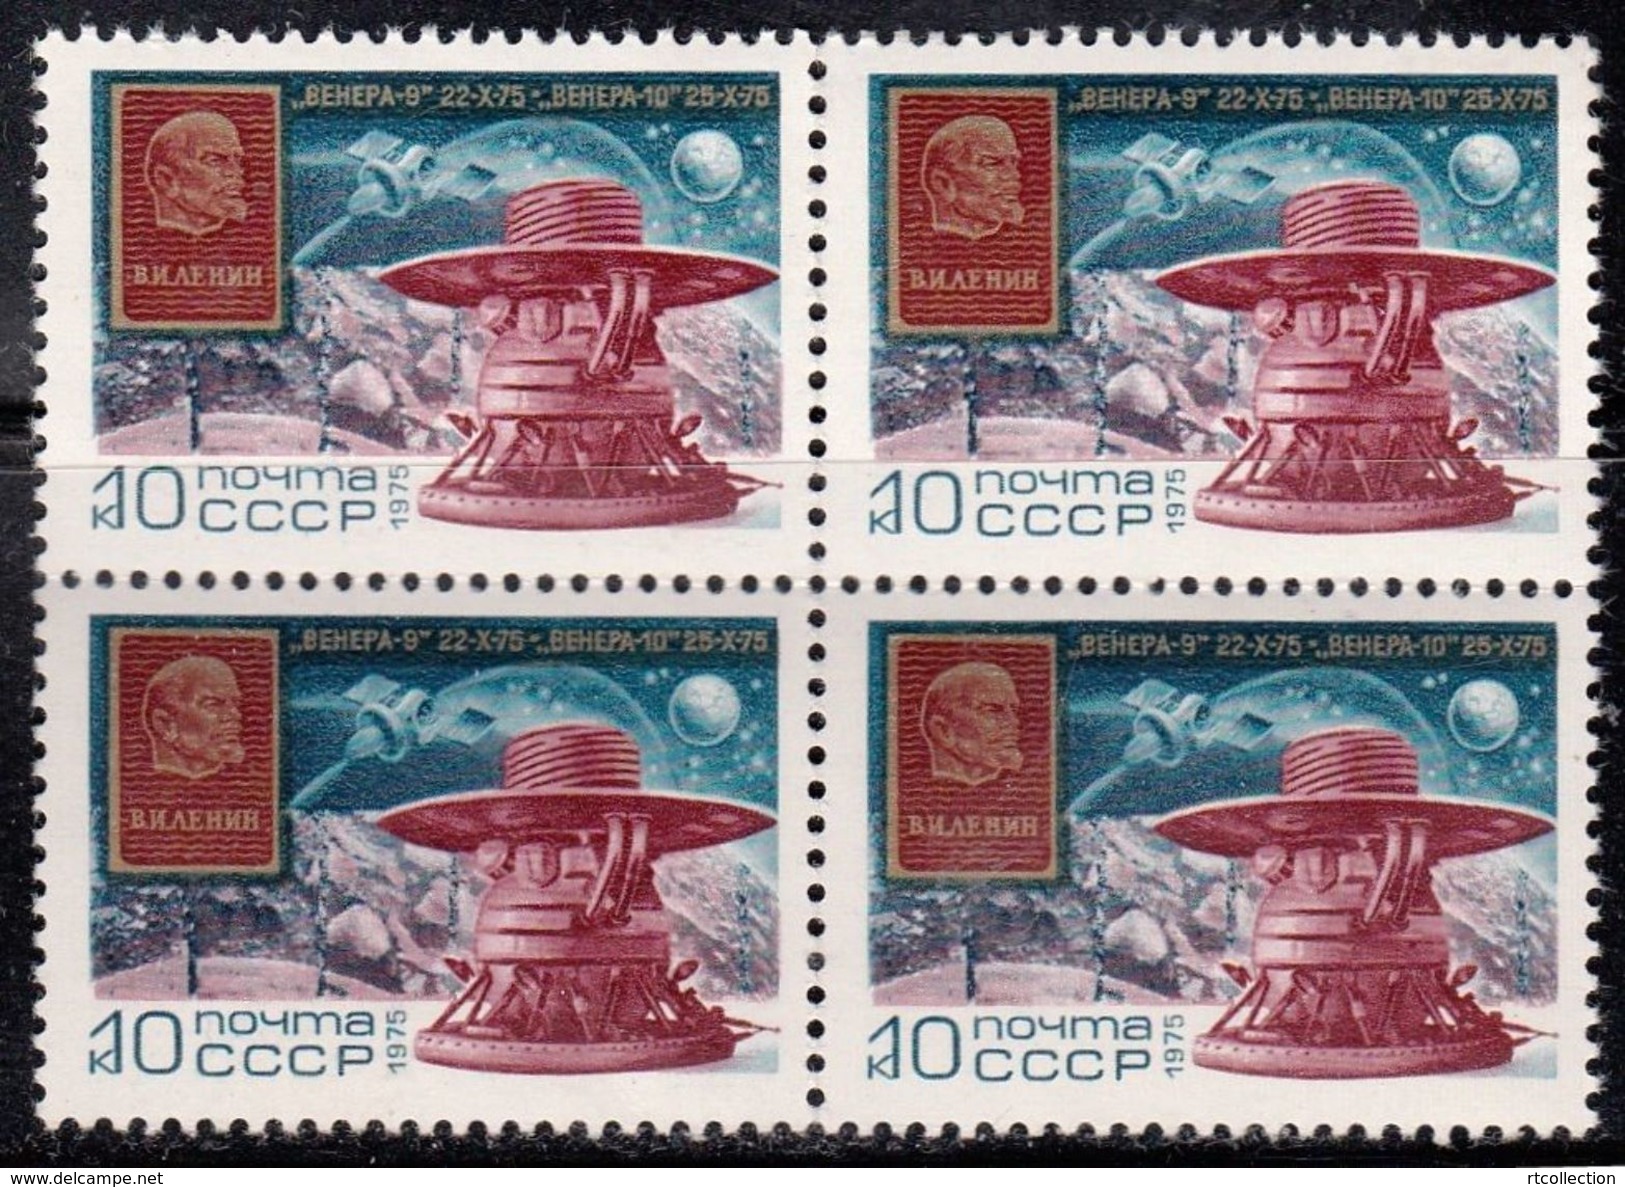 USSR Russia 1975 Block Soviet Interplanetary Stations Venera Space Flight Lenin People Sciences Stamp MNH Michel 4426 - Collections